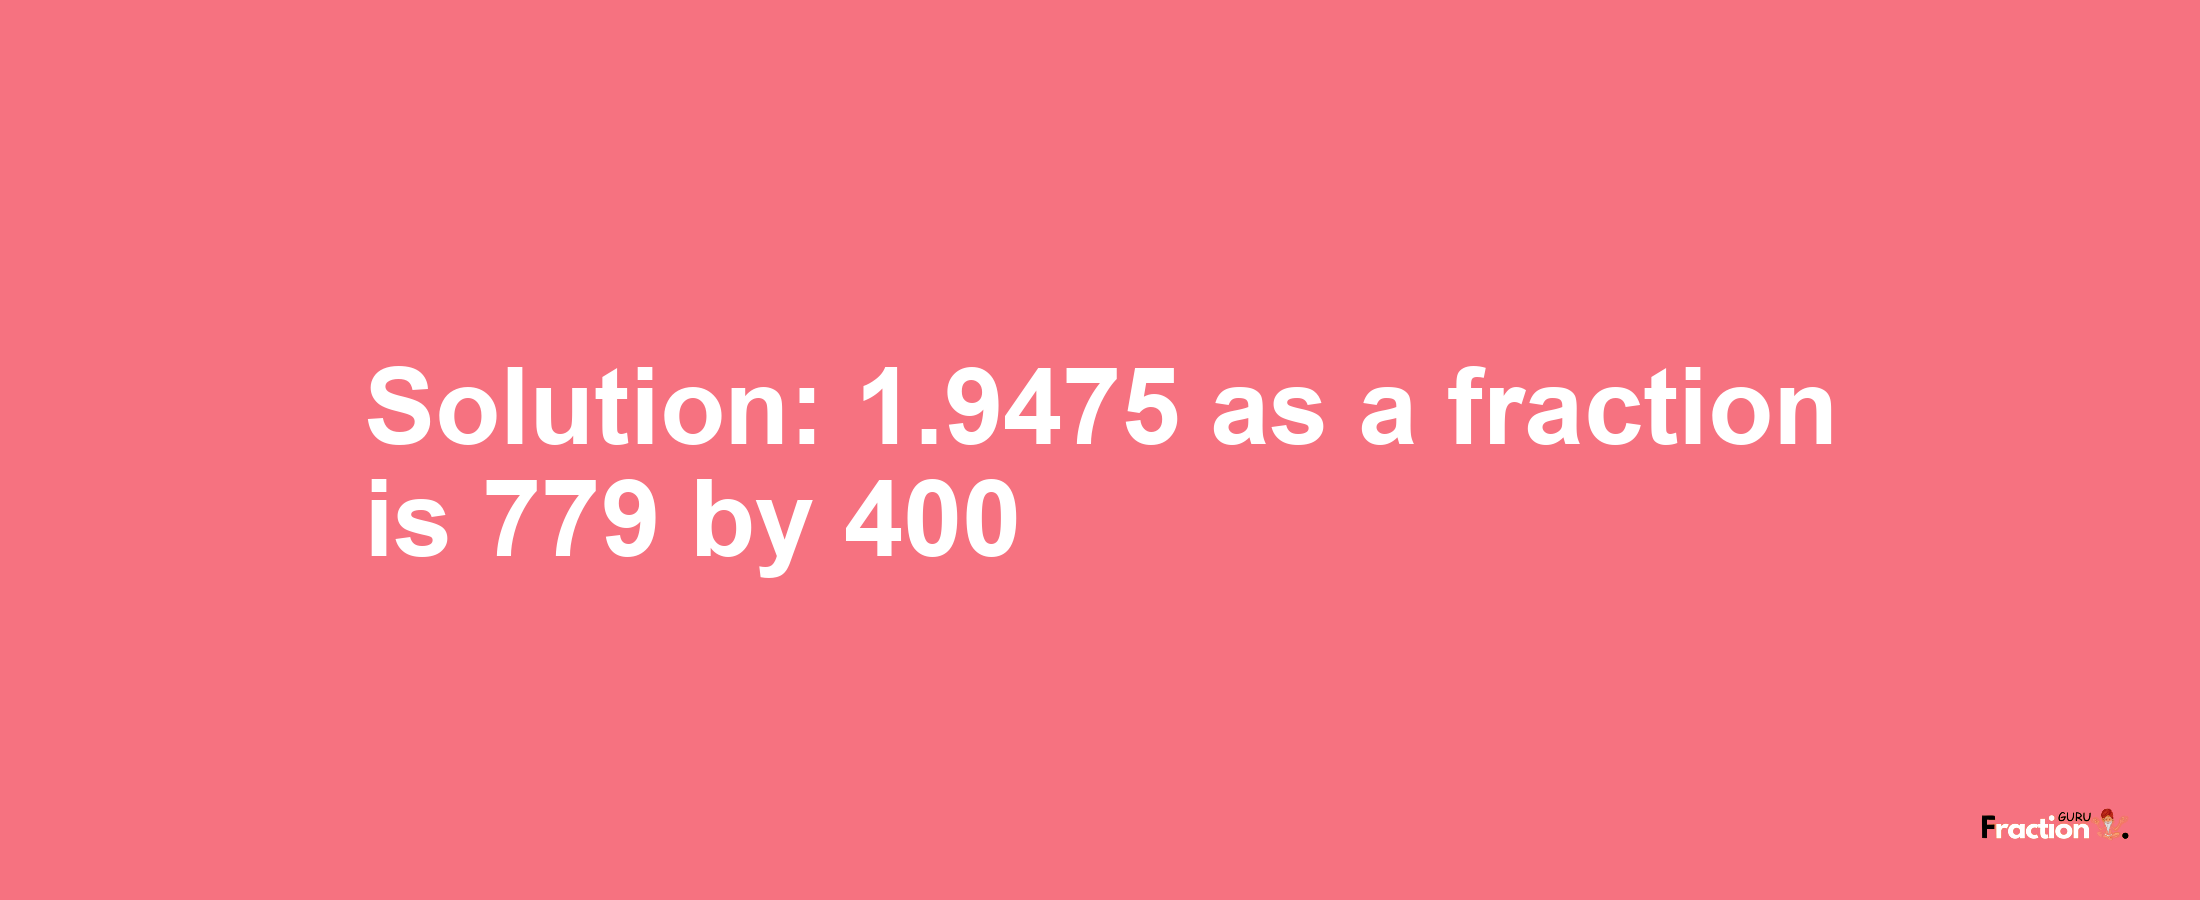 Solution:1.9475 as a fraction is 779/400